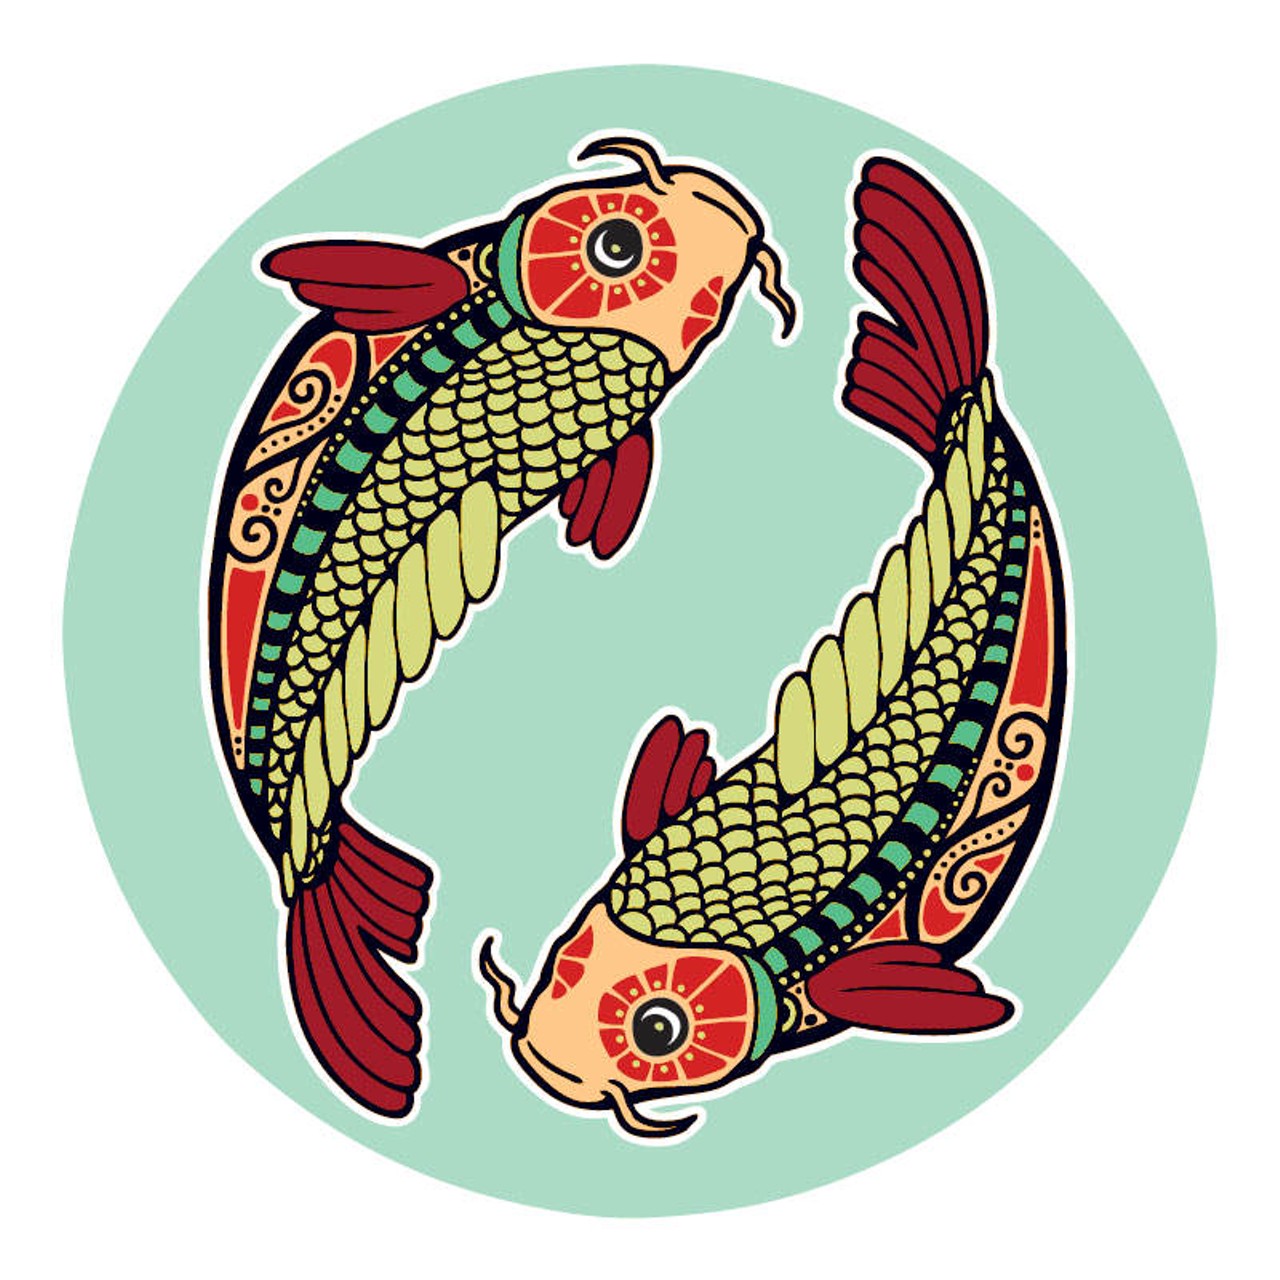 PISCES (Feb. 21-March 20): 
You are about to find out how important it is to expect the unexpected. If you&#146;re already on the roller coaster, you&#146;ve had enough uncertainty to last you a lifetime. For many of you, it&#146;s totally OK to not know what&#146;ll happen next because you were itching for a change and ready for something to come along and blow you away. For others, the feeling that you&#146;re out of control is making it harder to go with the flow. No matter who you are, change is the operative word and the need for control needs to be exchanged for a willingness to let nature take its course.